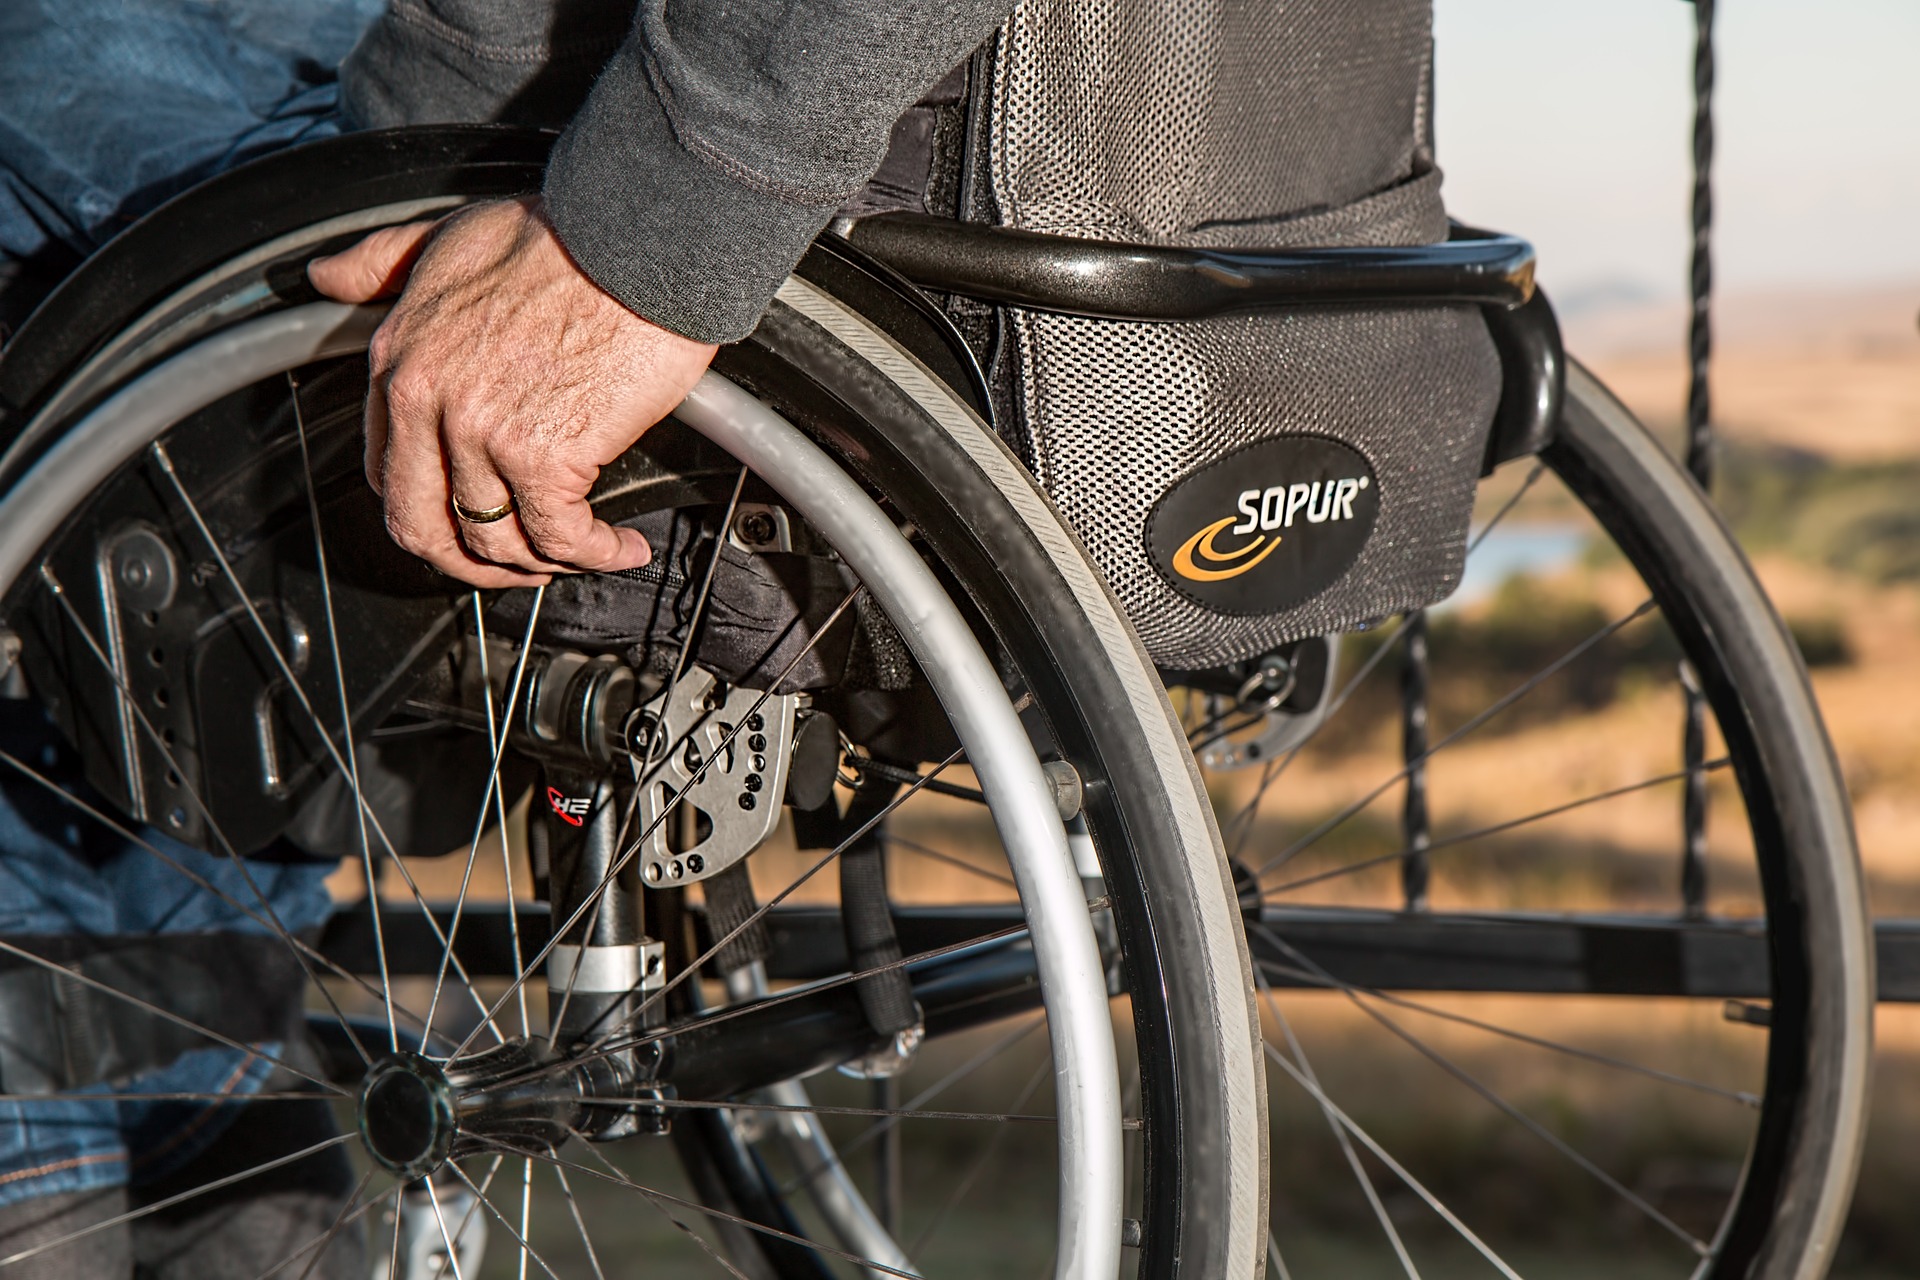 wheelchair user by steve buissinne from pixabay